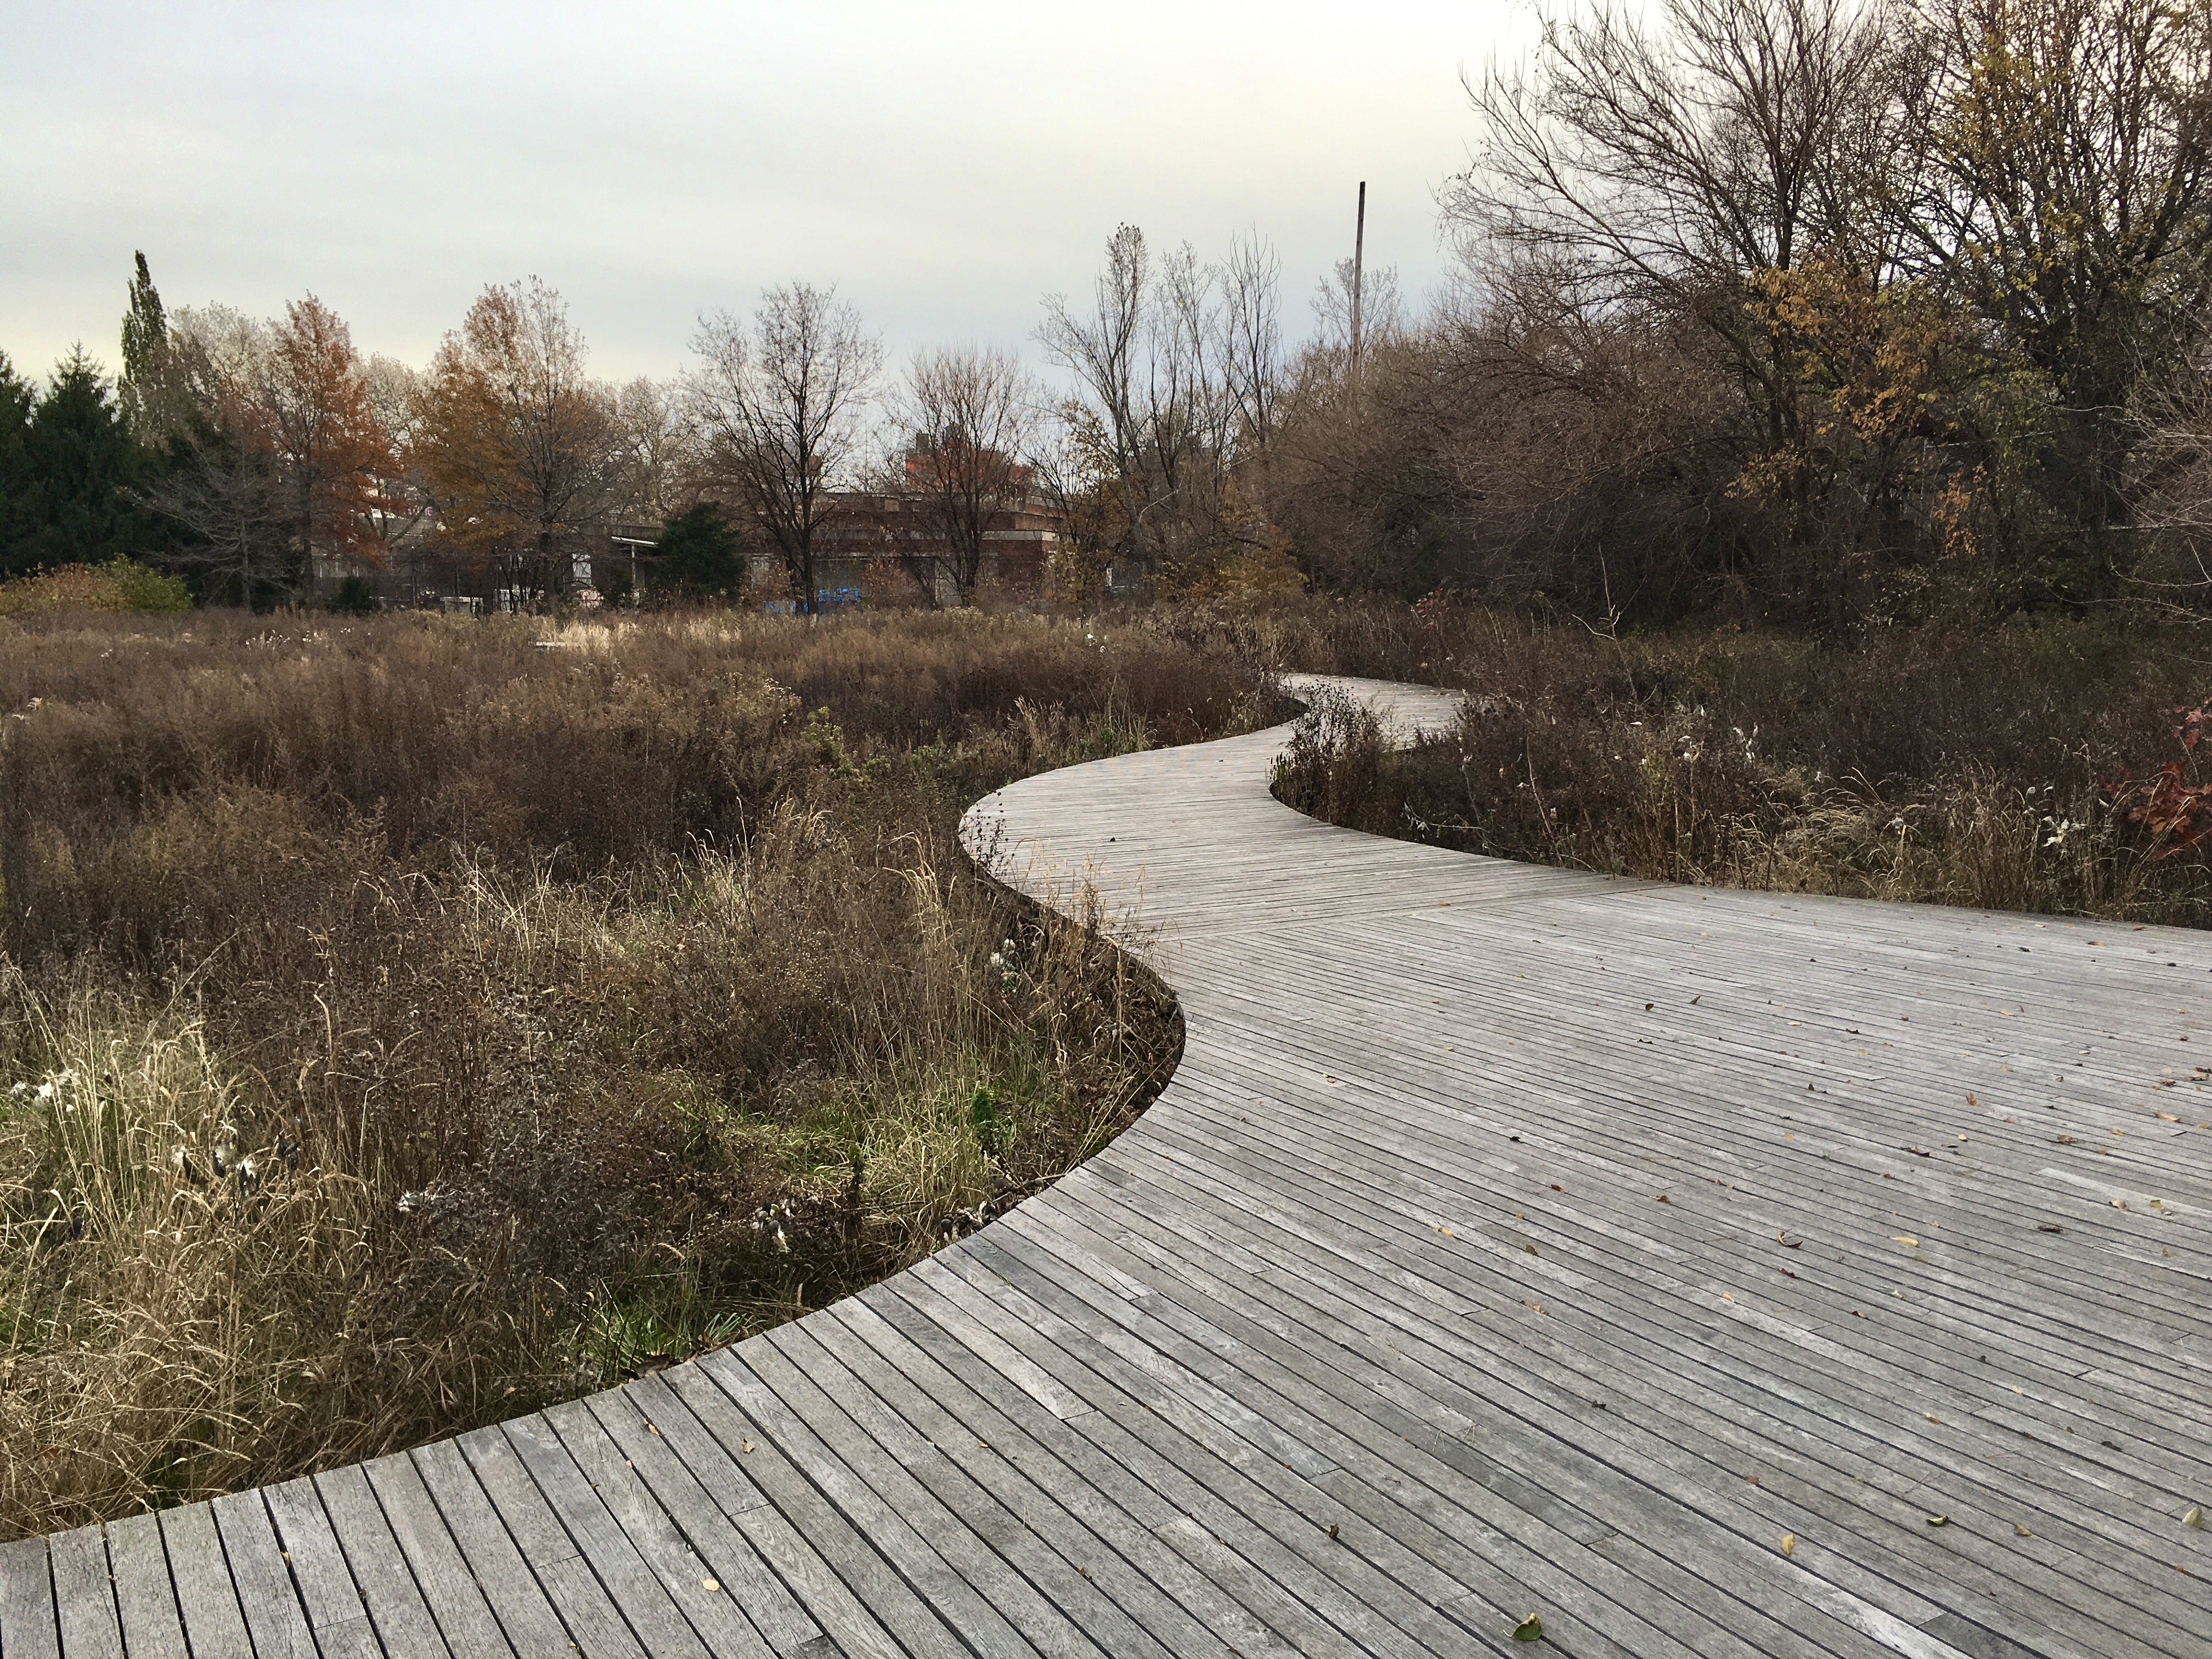 A boardwalk winds its way through the Naval Cemetery Landscape. Photo: Lore Croghan/Brooklyn Eagle